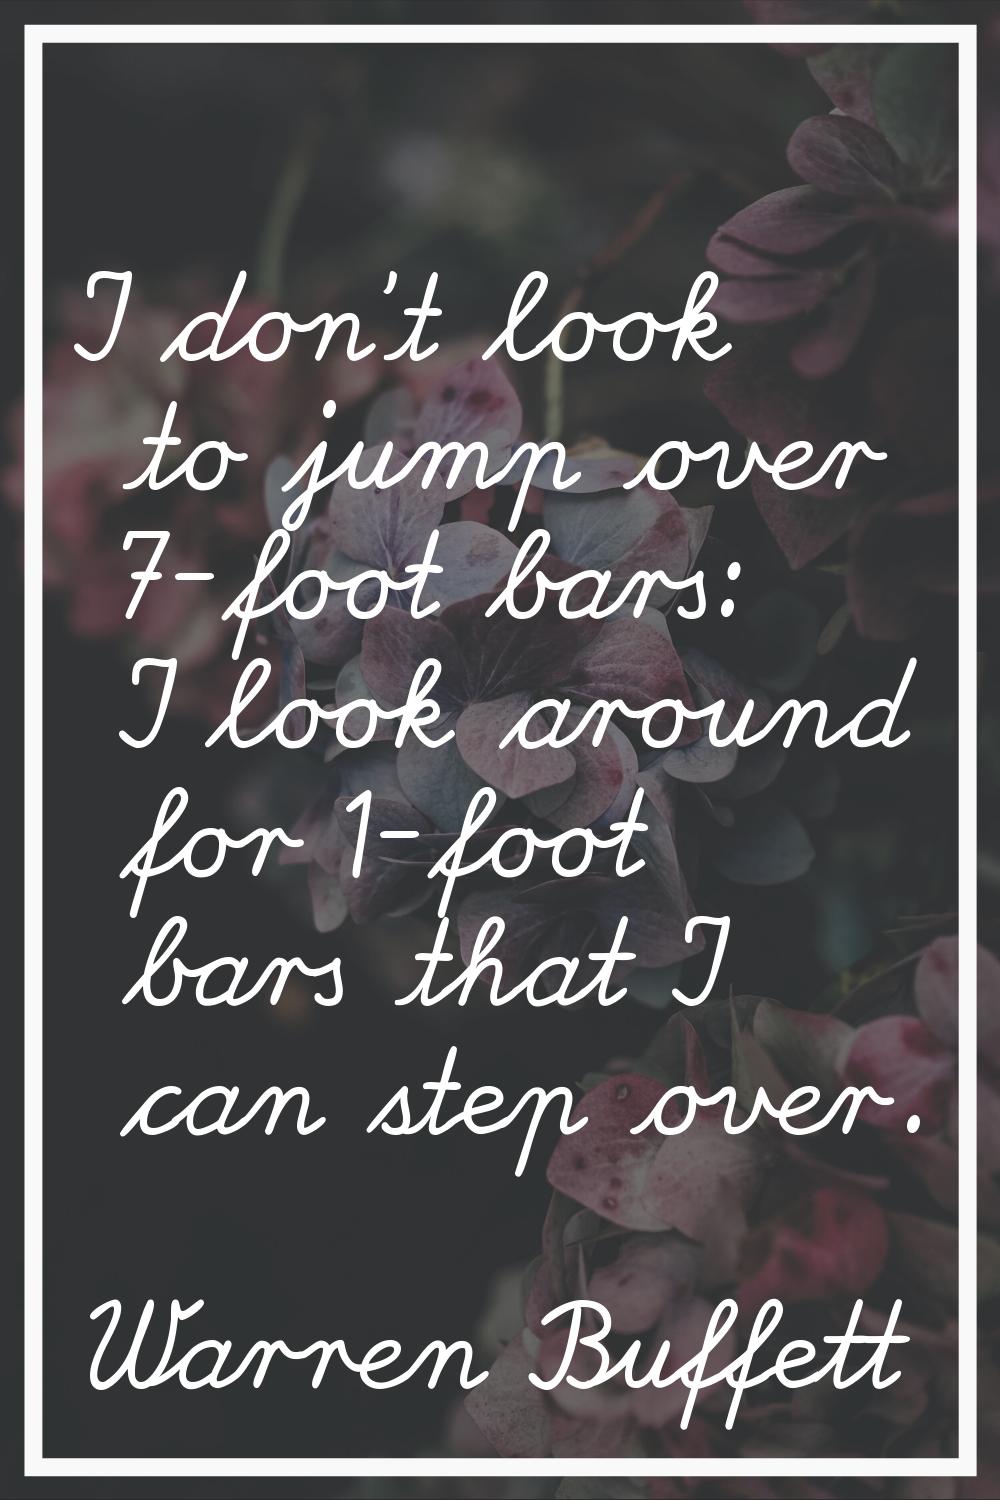 I don't look to jump over 7-foot bars: I look around for 1-foot bars that I can step over.